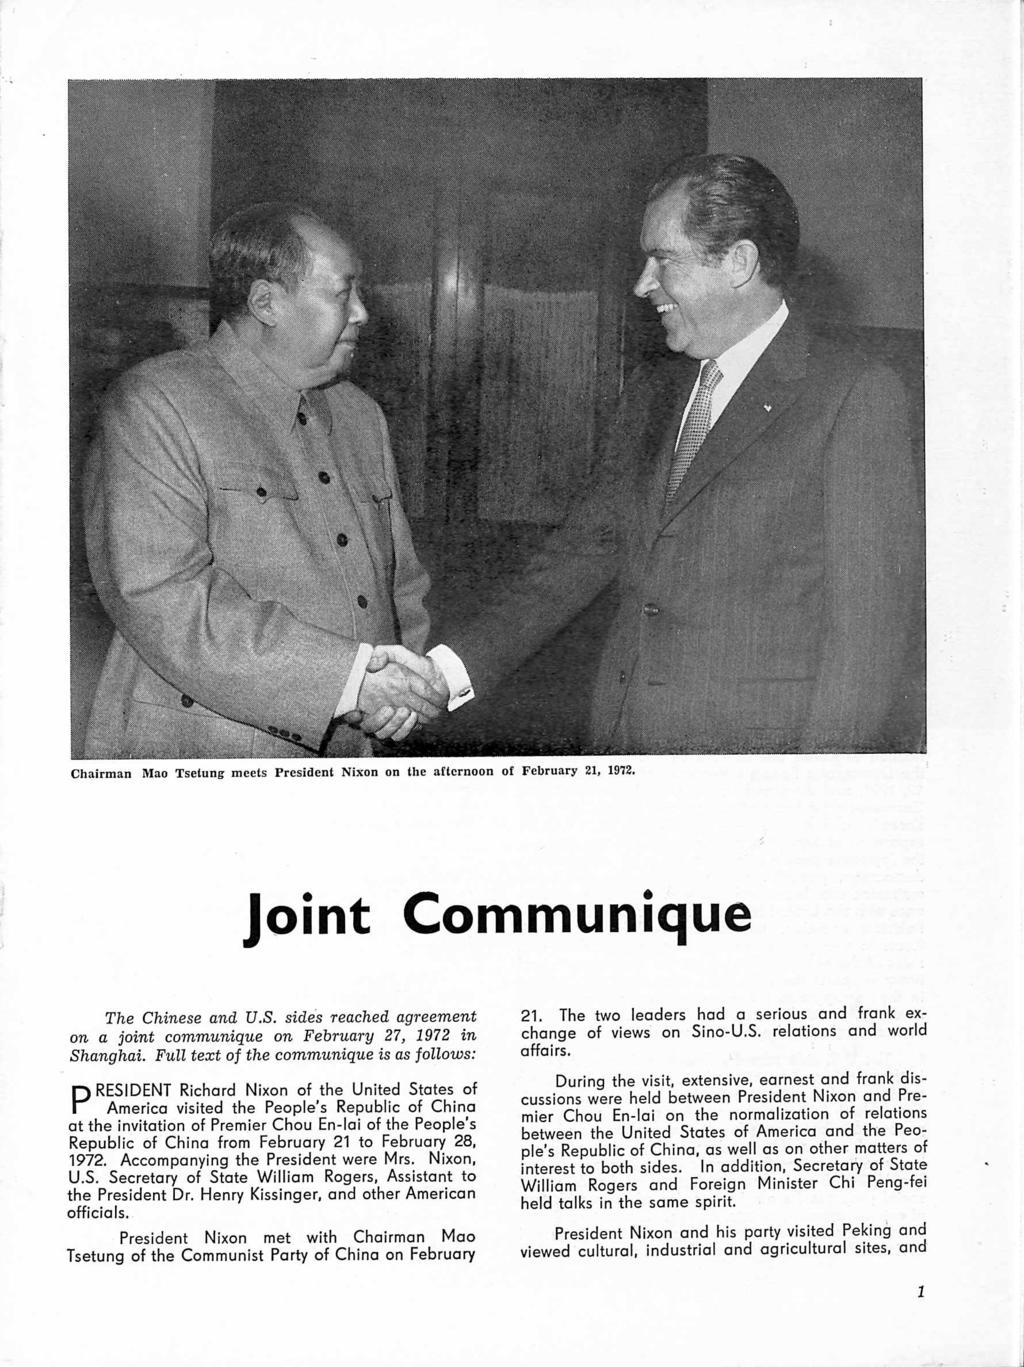 Chairman Mao Tselung meets President Nixon on the afternoon of February 21, 1972. Joint Communique The Chinese and U.S. sides reached agreement on a joint communique on February 27, 1972 in Shanghai.